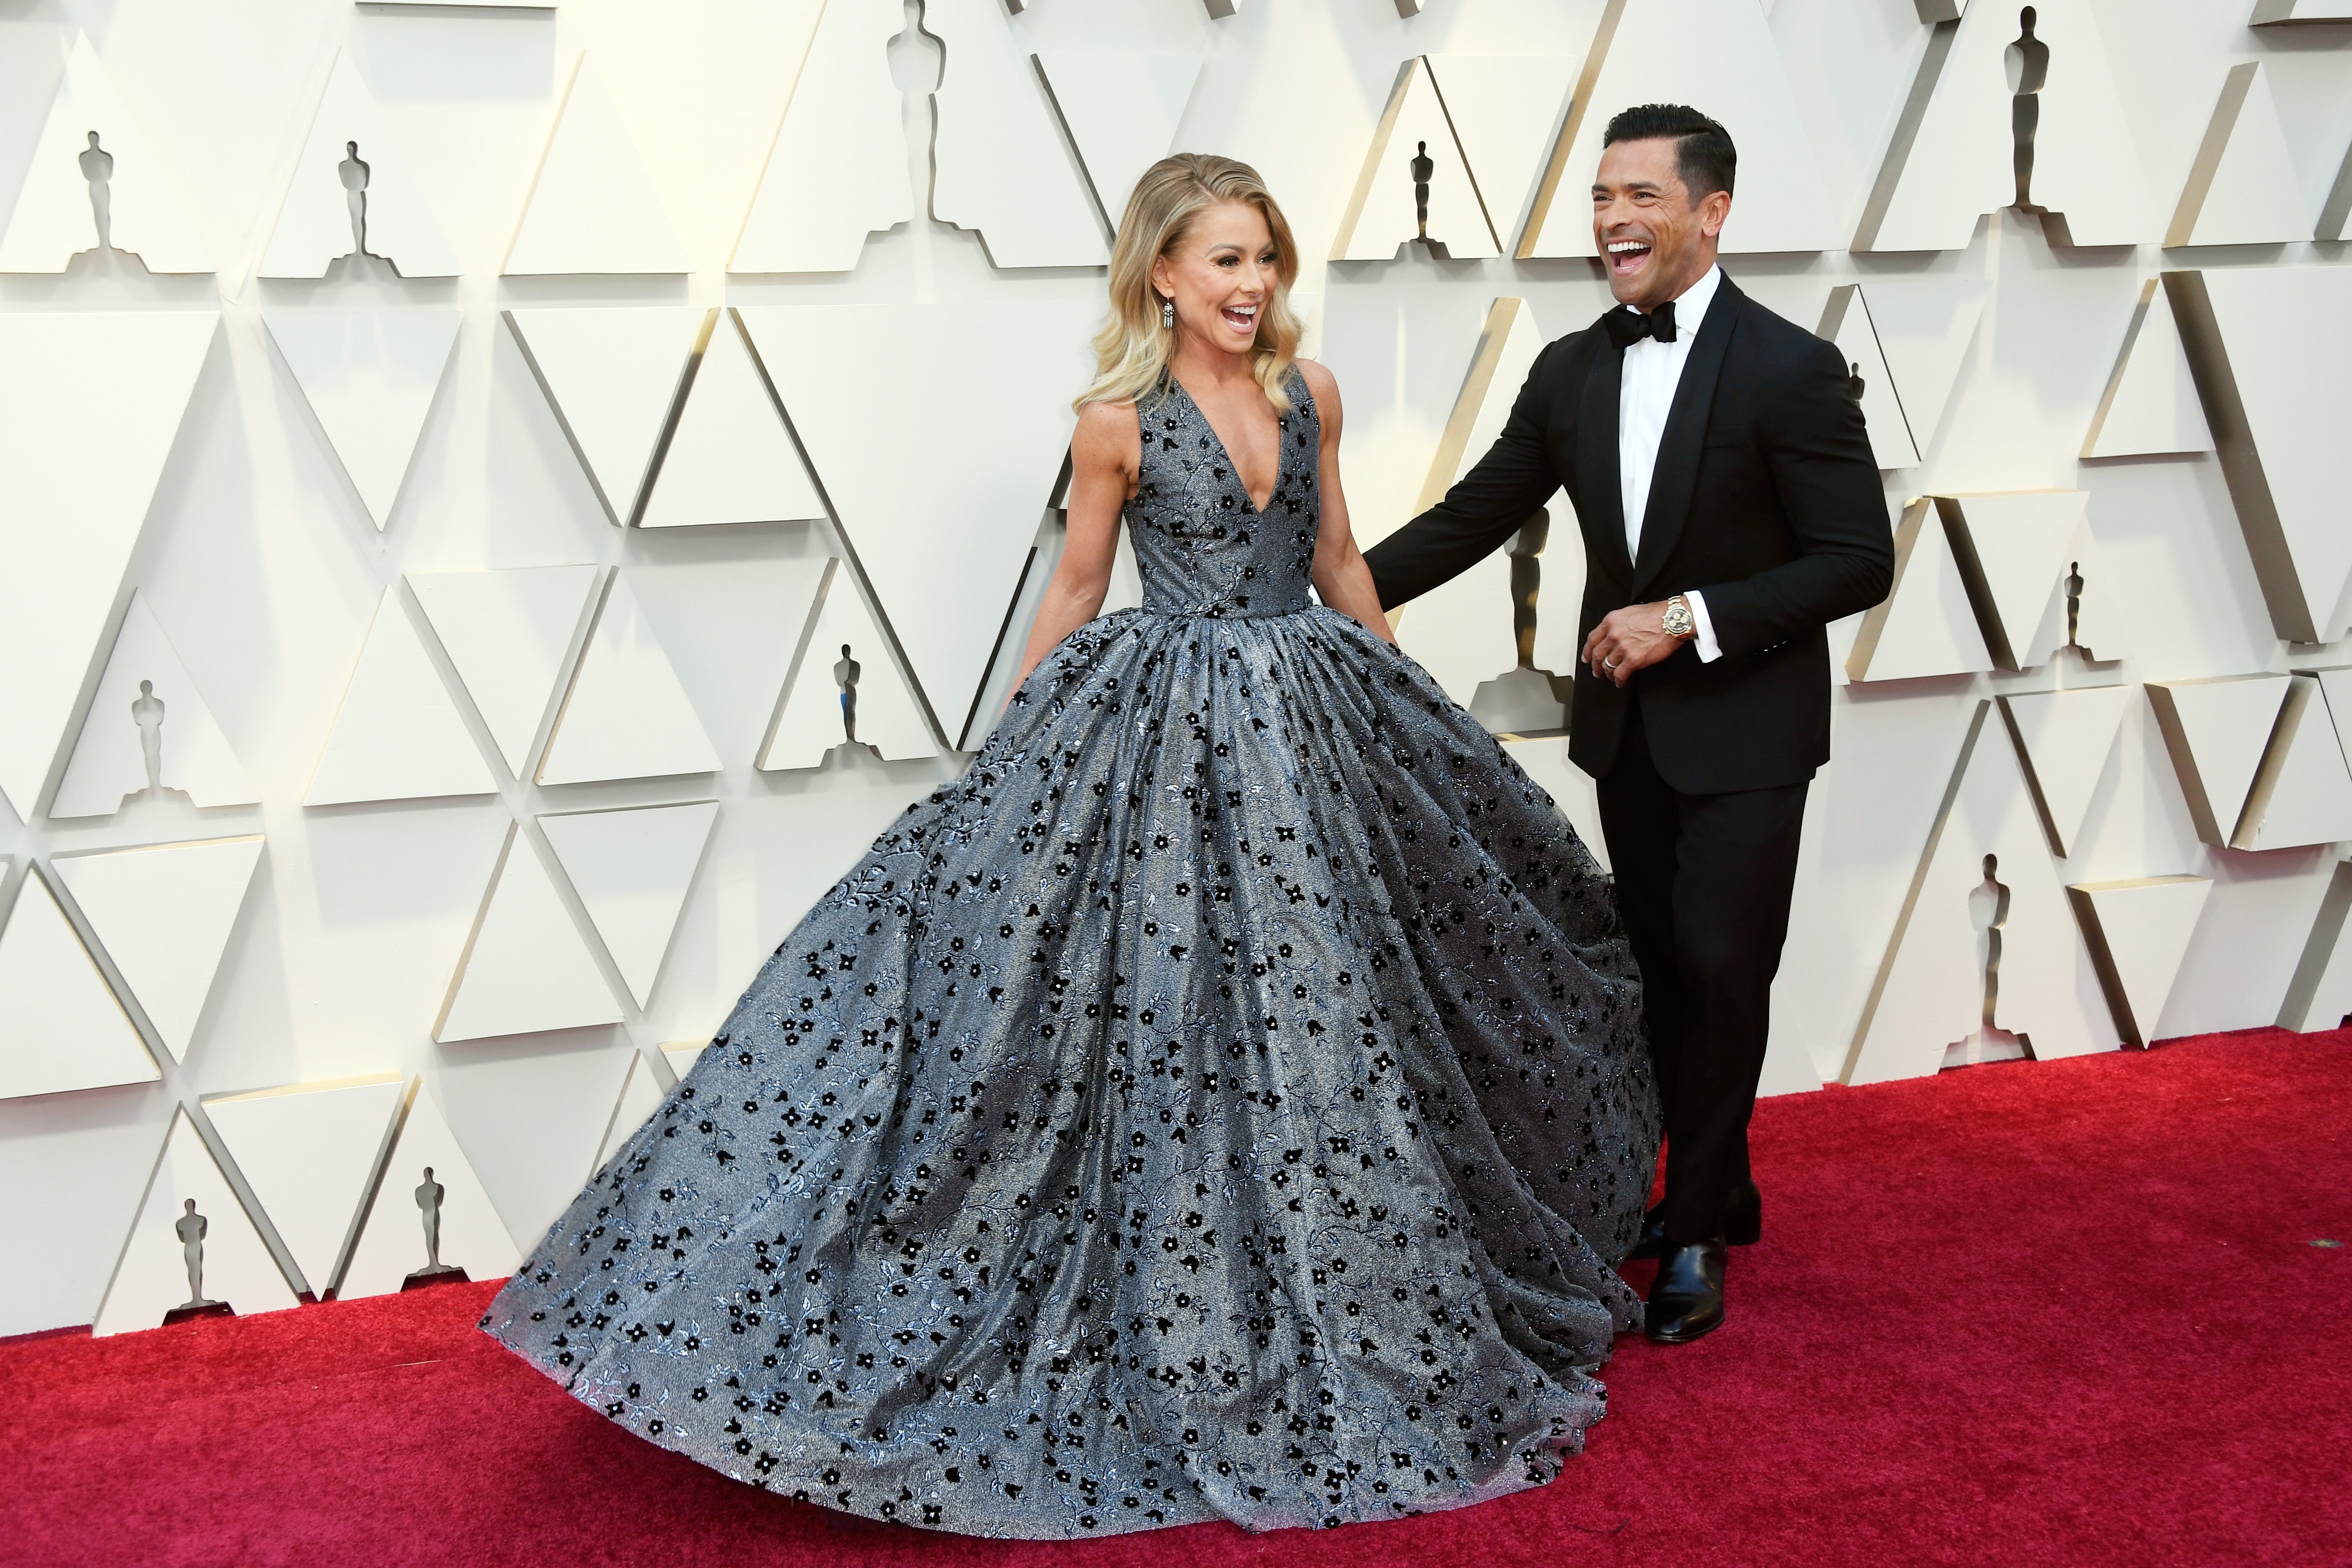 Kelly Ripa and Mark Consuelos attend the 91st Annual Academy Awards at Hollywood and Highland on February 24, 2019, in Hollywood, California. | Source: Getty Images.